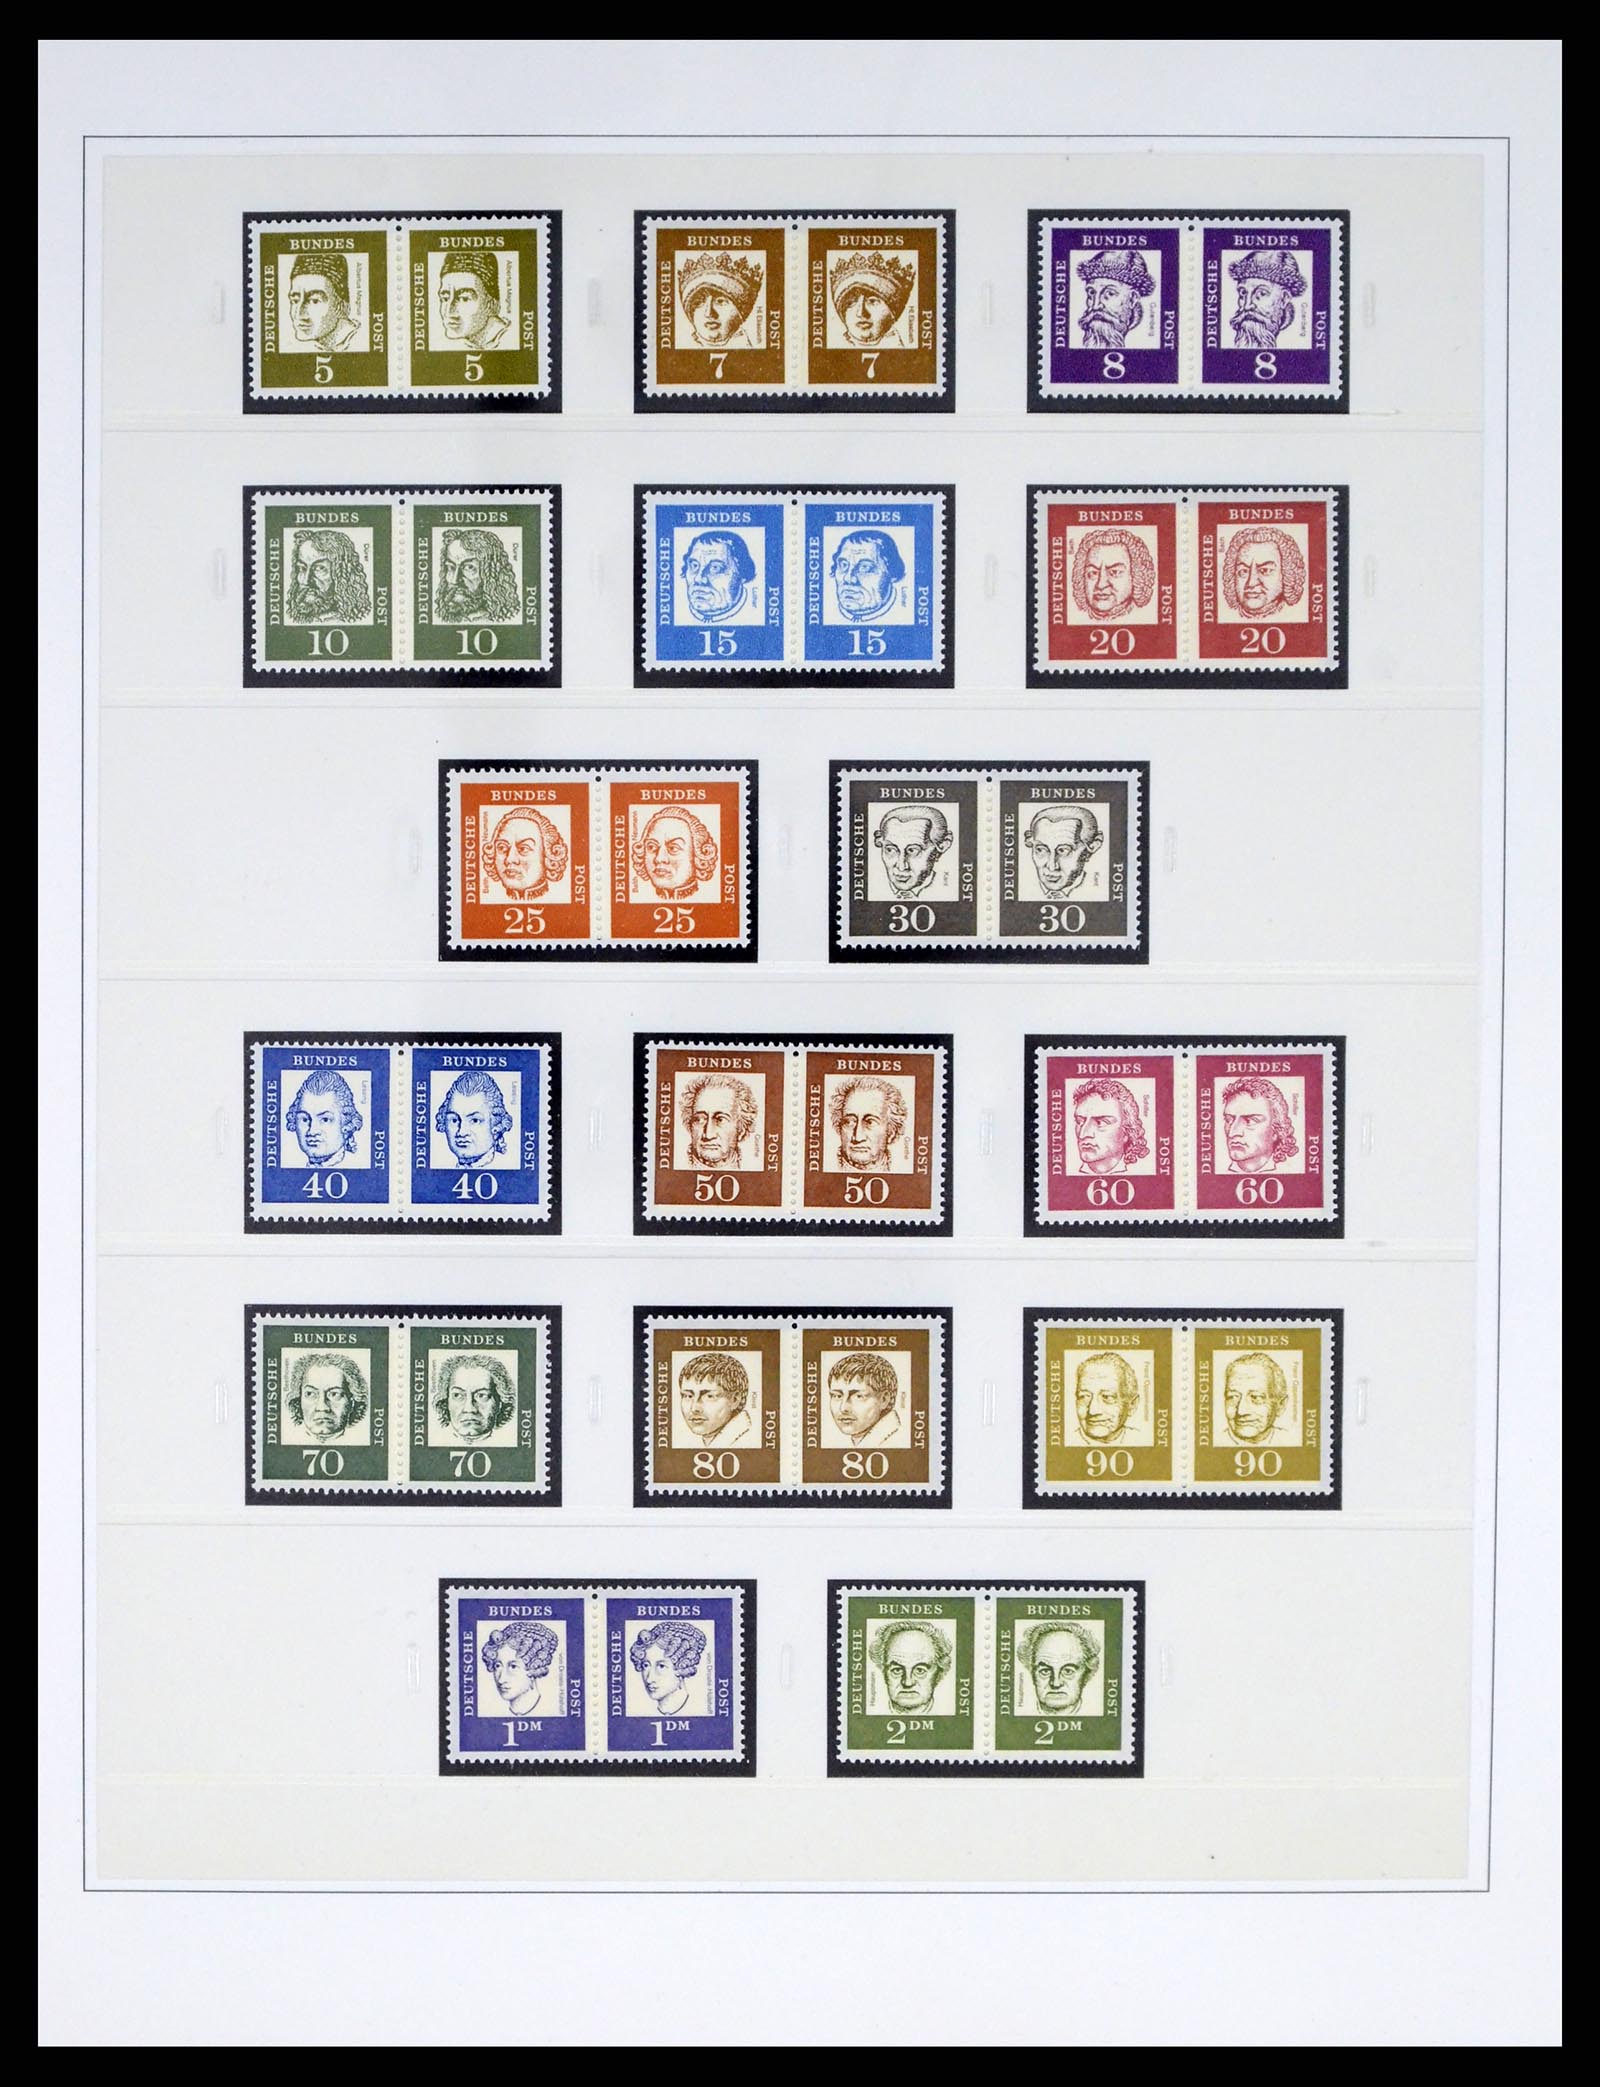 37354 003 - Stamp collection 37354 Bundespost and Berlin 1955-2000.